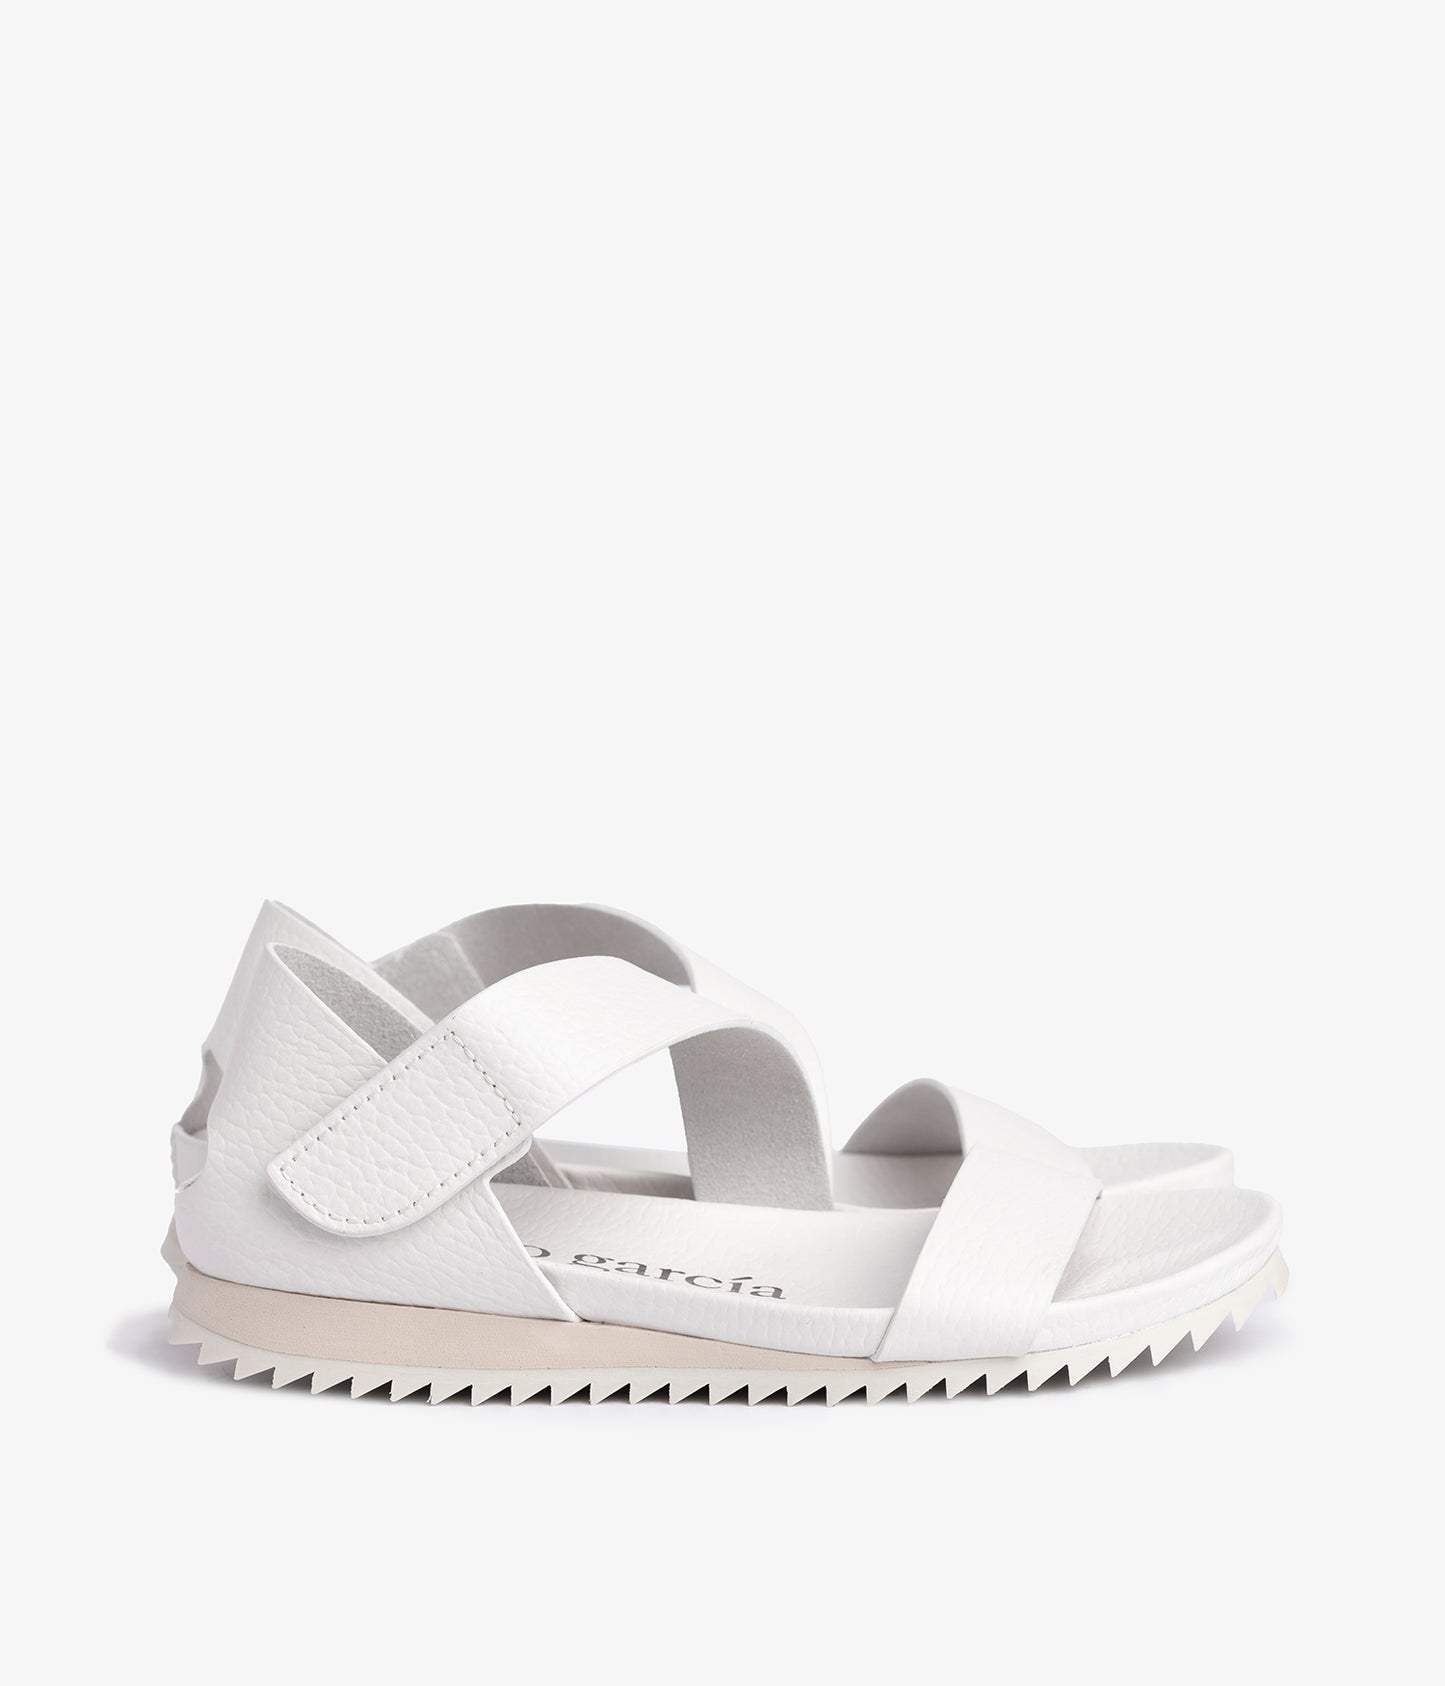 Flat sandal in white leather | Jedda | Essentials collection | PEDRO ...